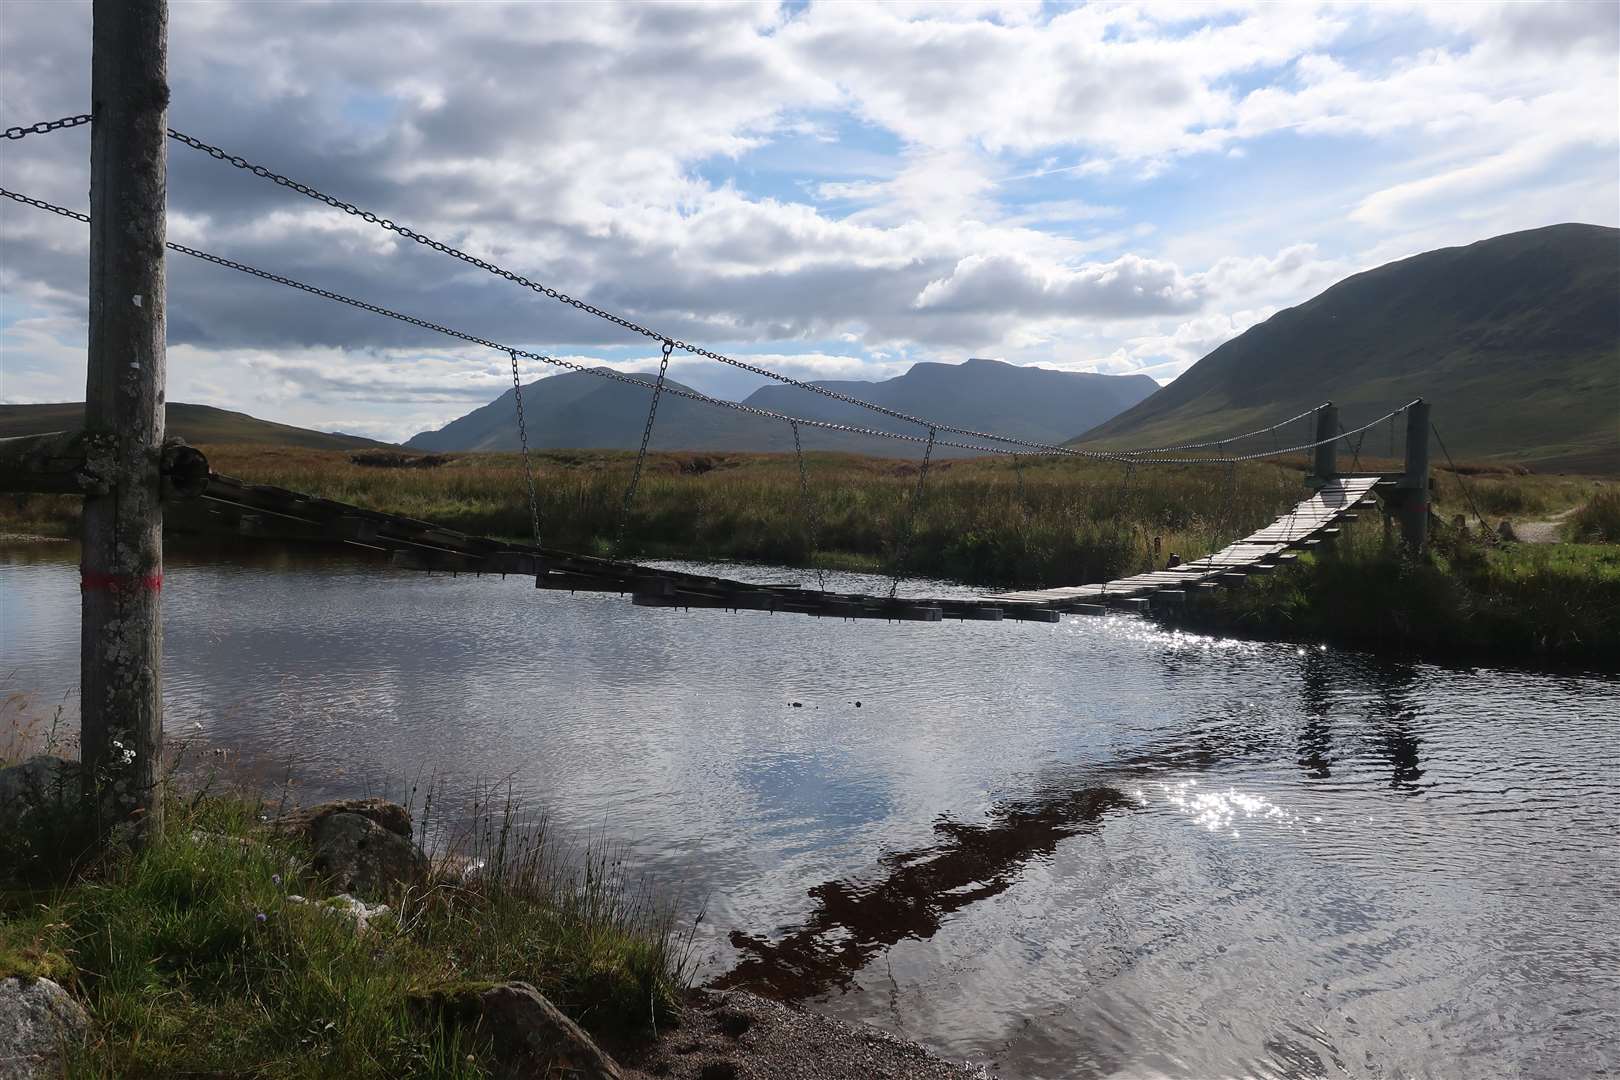 The rickety suspension bridge that crosses the Allt a' Chaoil-reidhe as it enters Loch Pattack, with Ben Alder in the distance.